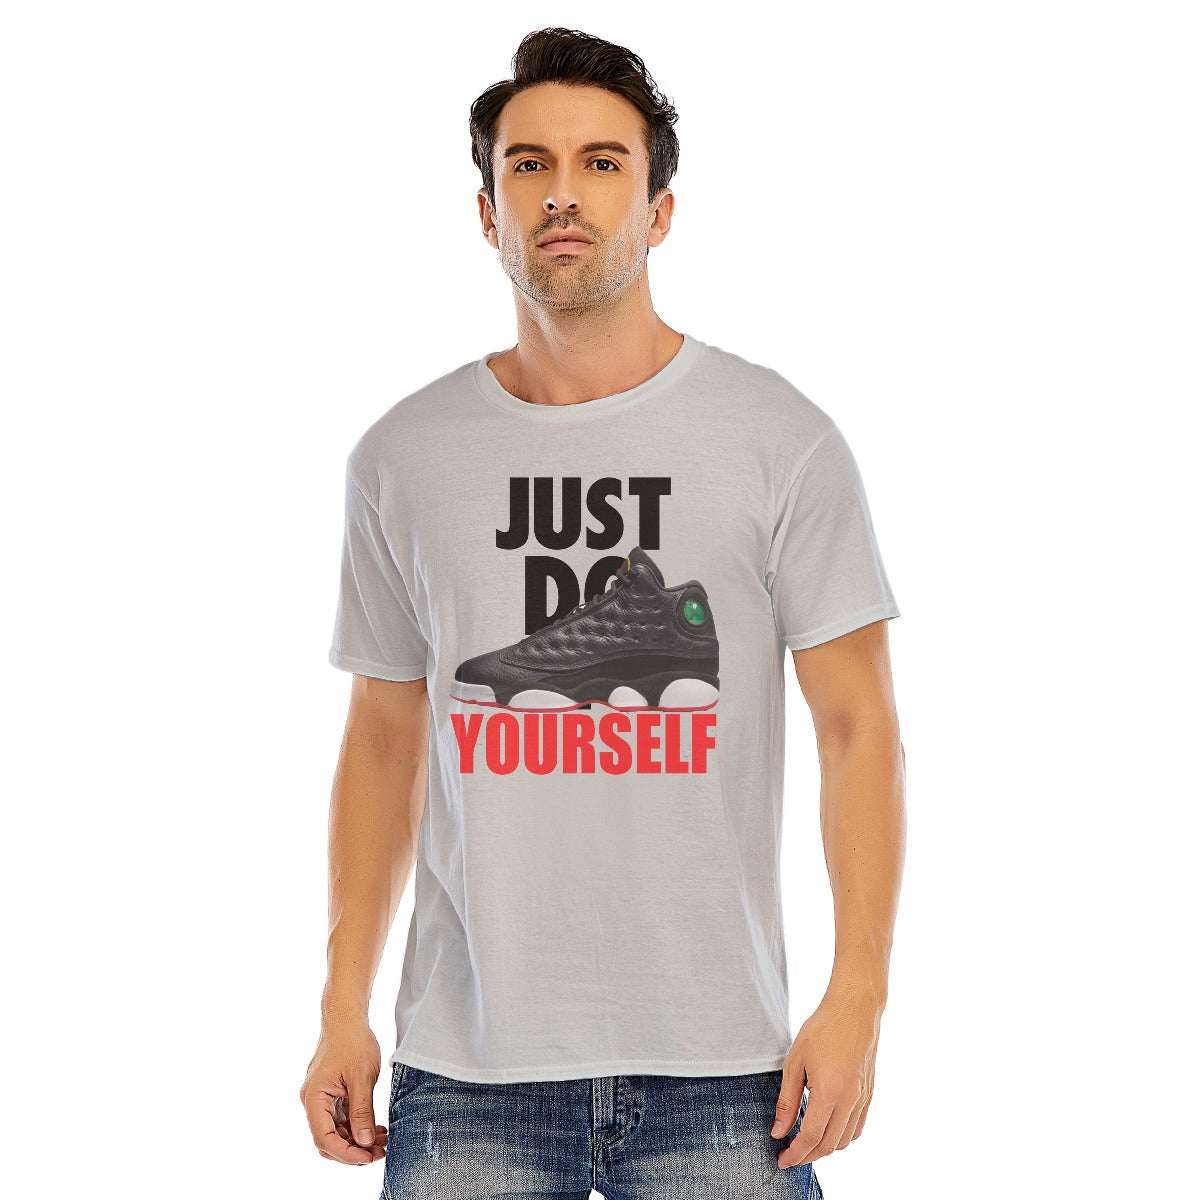 Just Do It YOURSELF Tee